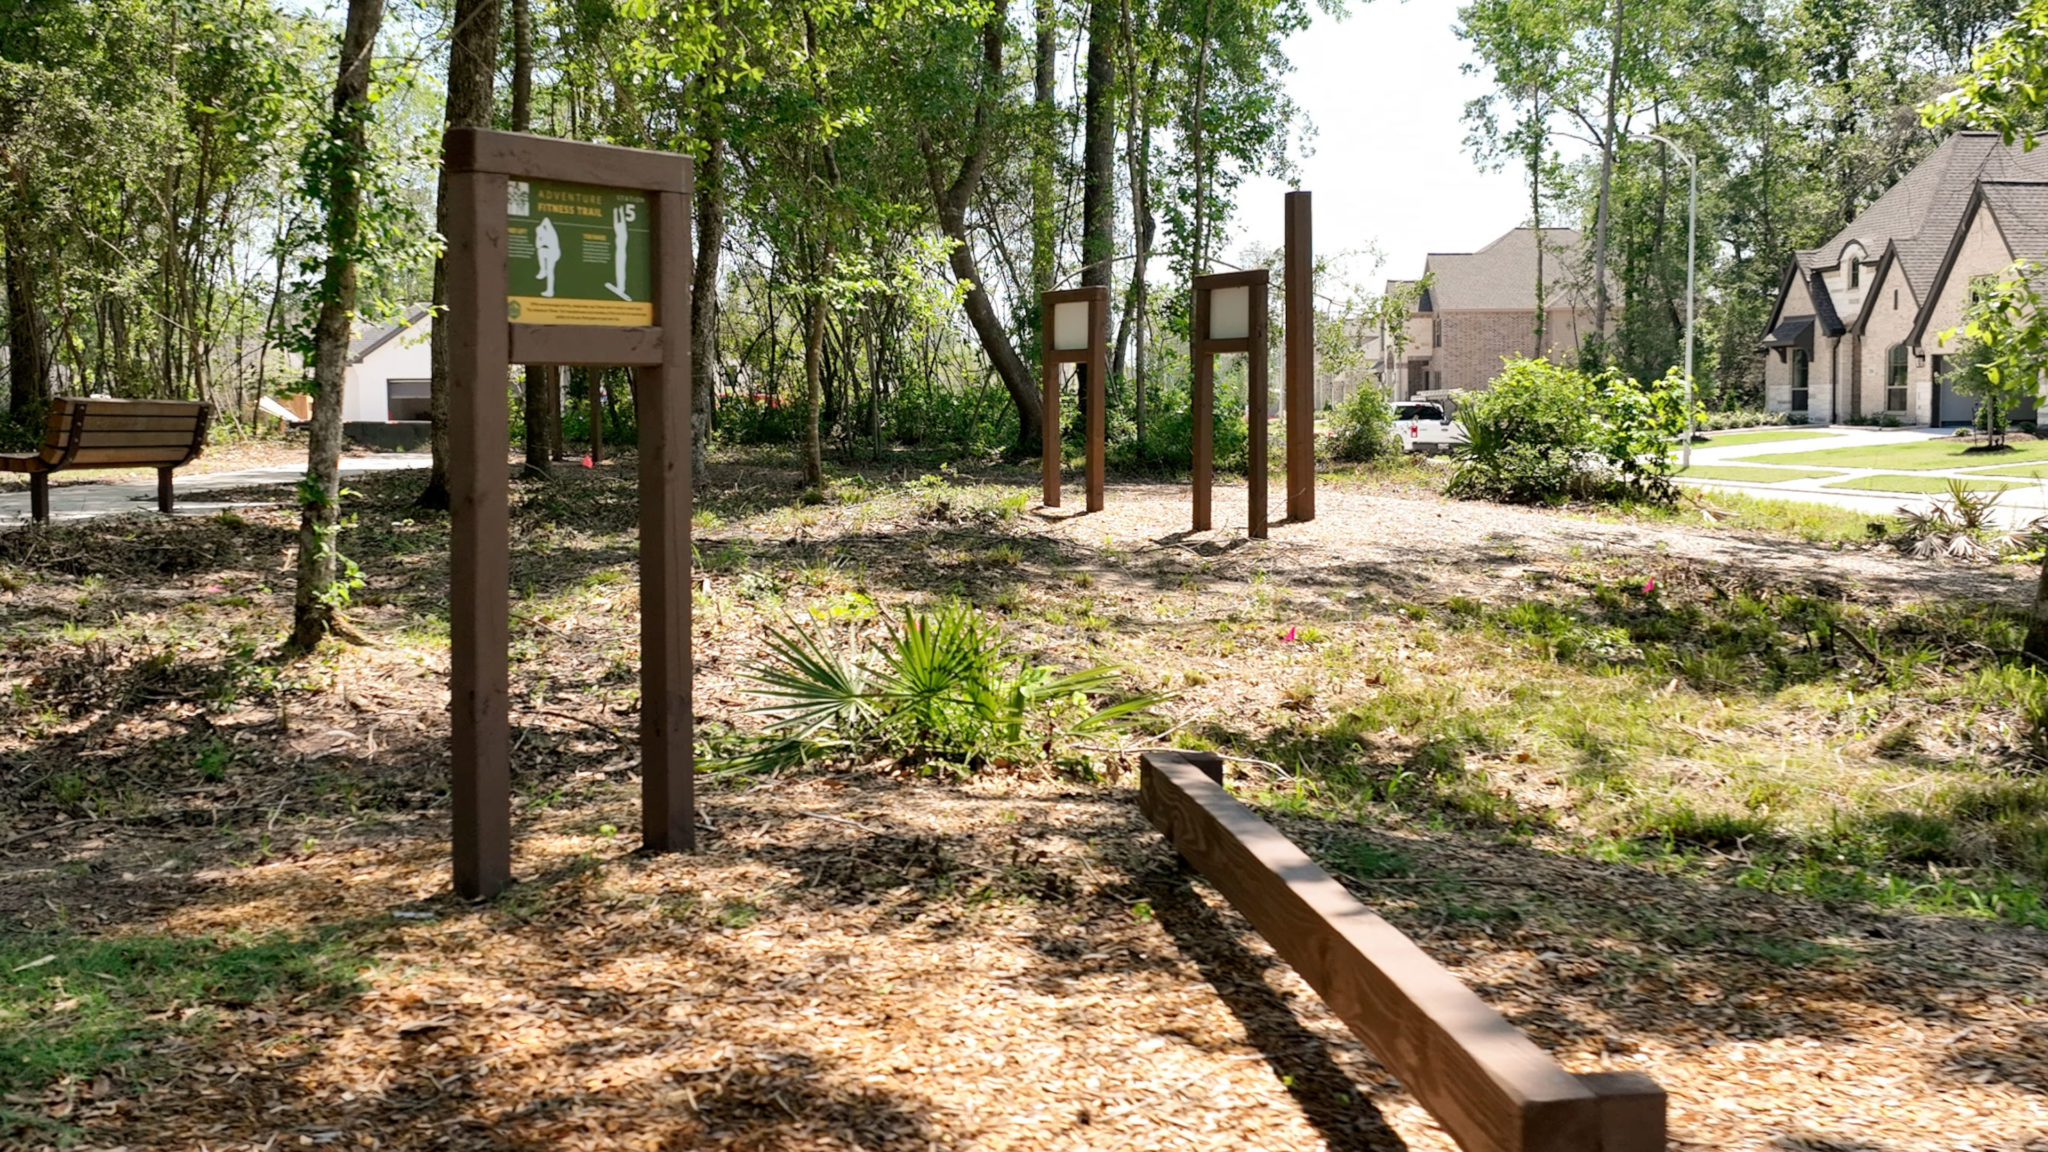 With several stations placed throughout the adventure fitness trail, Circuit Park is intended to challenge our residents both physically and mentally. 